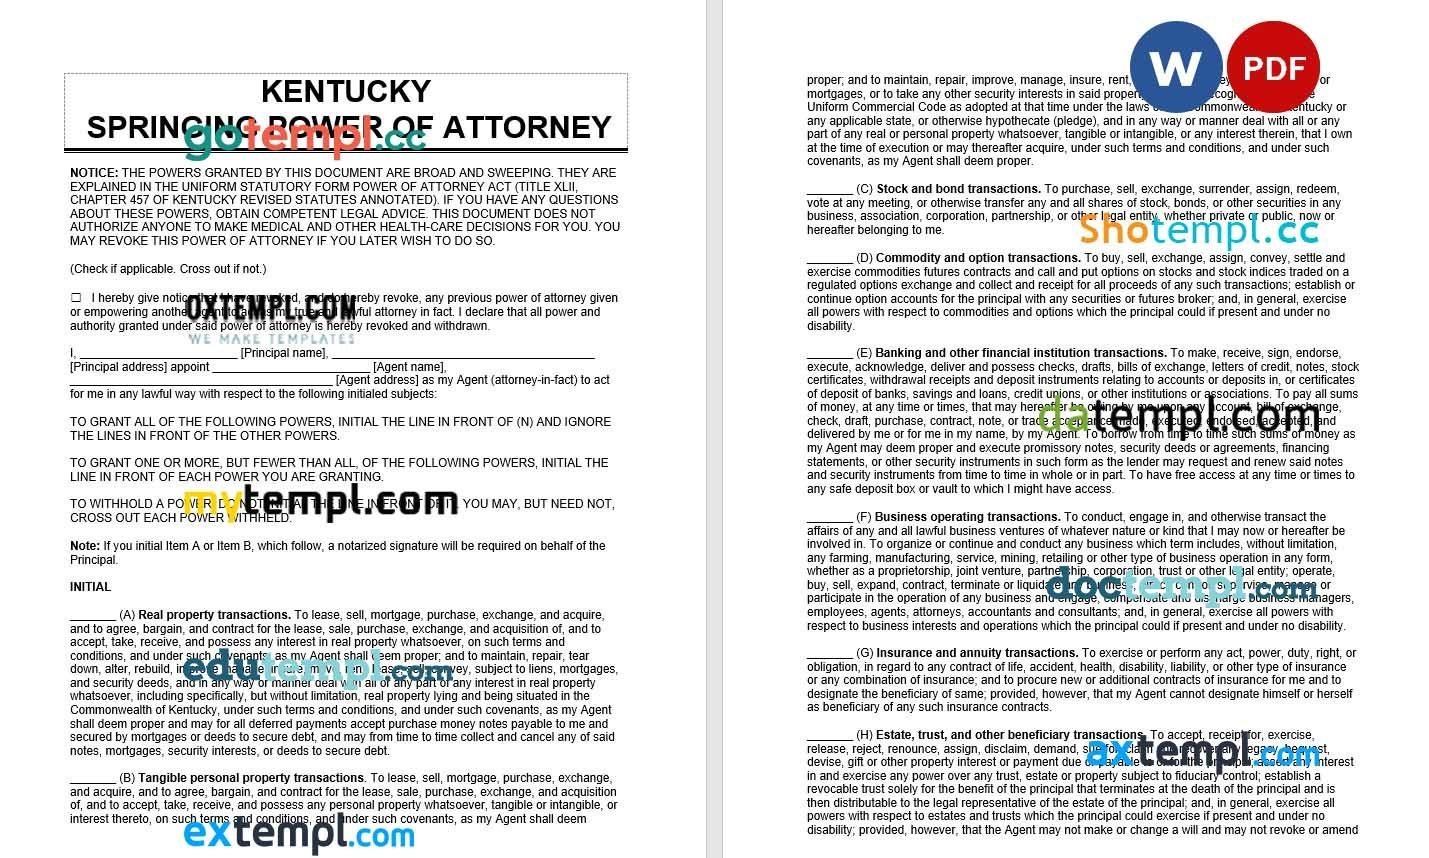 Kentucky Springing Power of Attorney example, fully editable